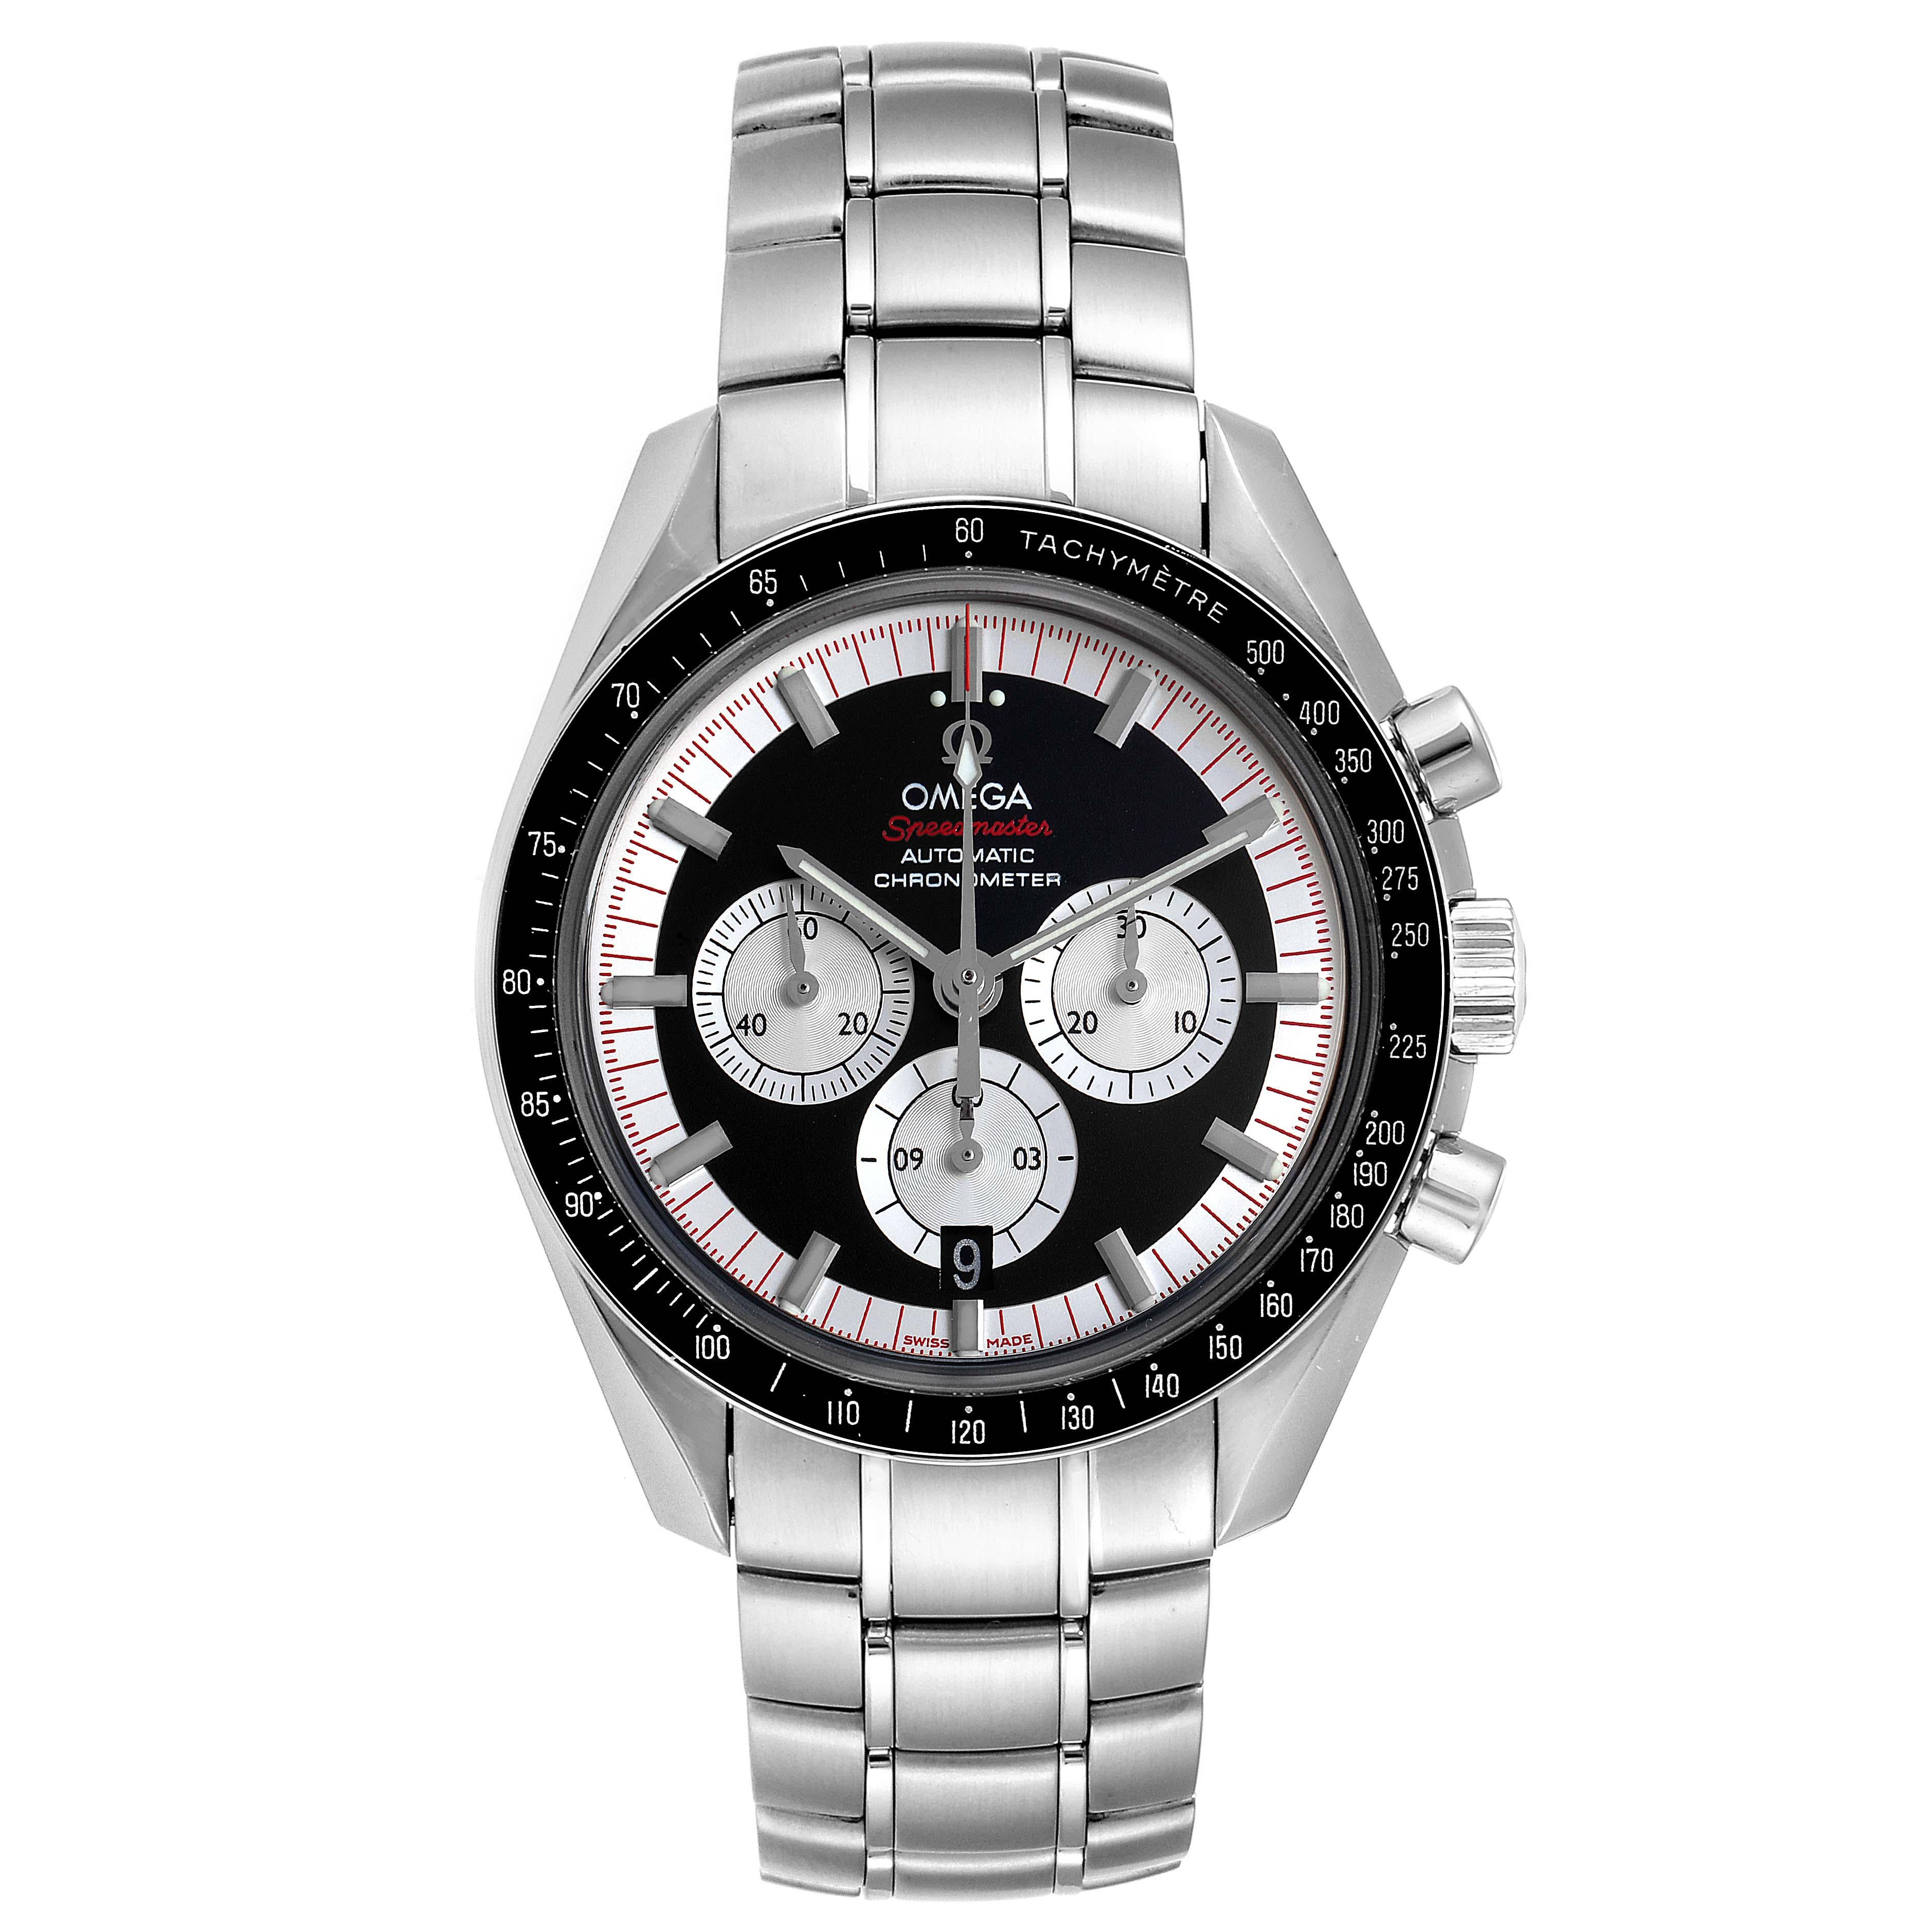 Omega Speedmaster Schumacher Legend Limited Edition Watch 3507.51.00. Automatic self-winding chronograph movement. Stainless steel round case 42.0 mm in diameter. Black ion-plated bezel with tachymetre function. Scratch-resistant sapphire crystal